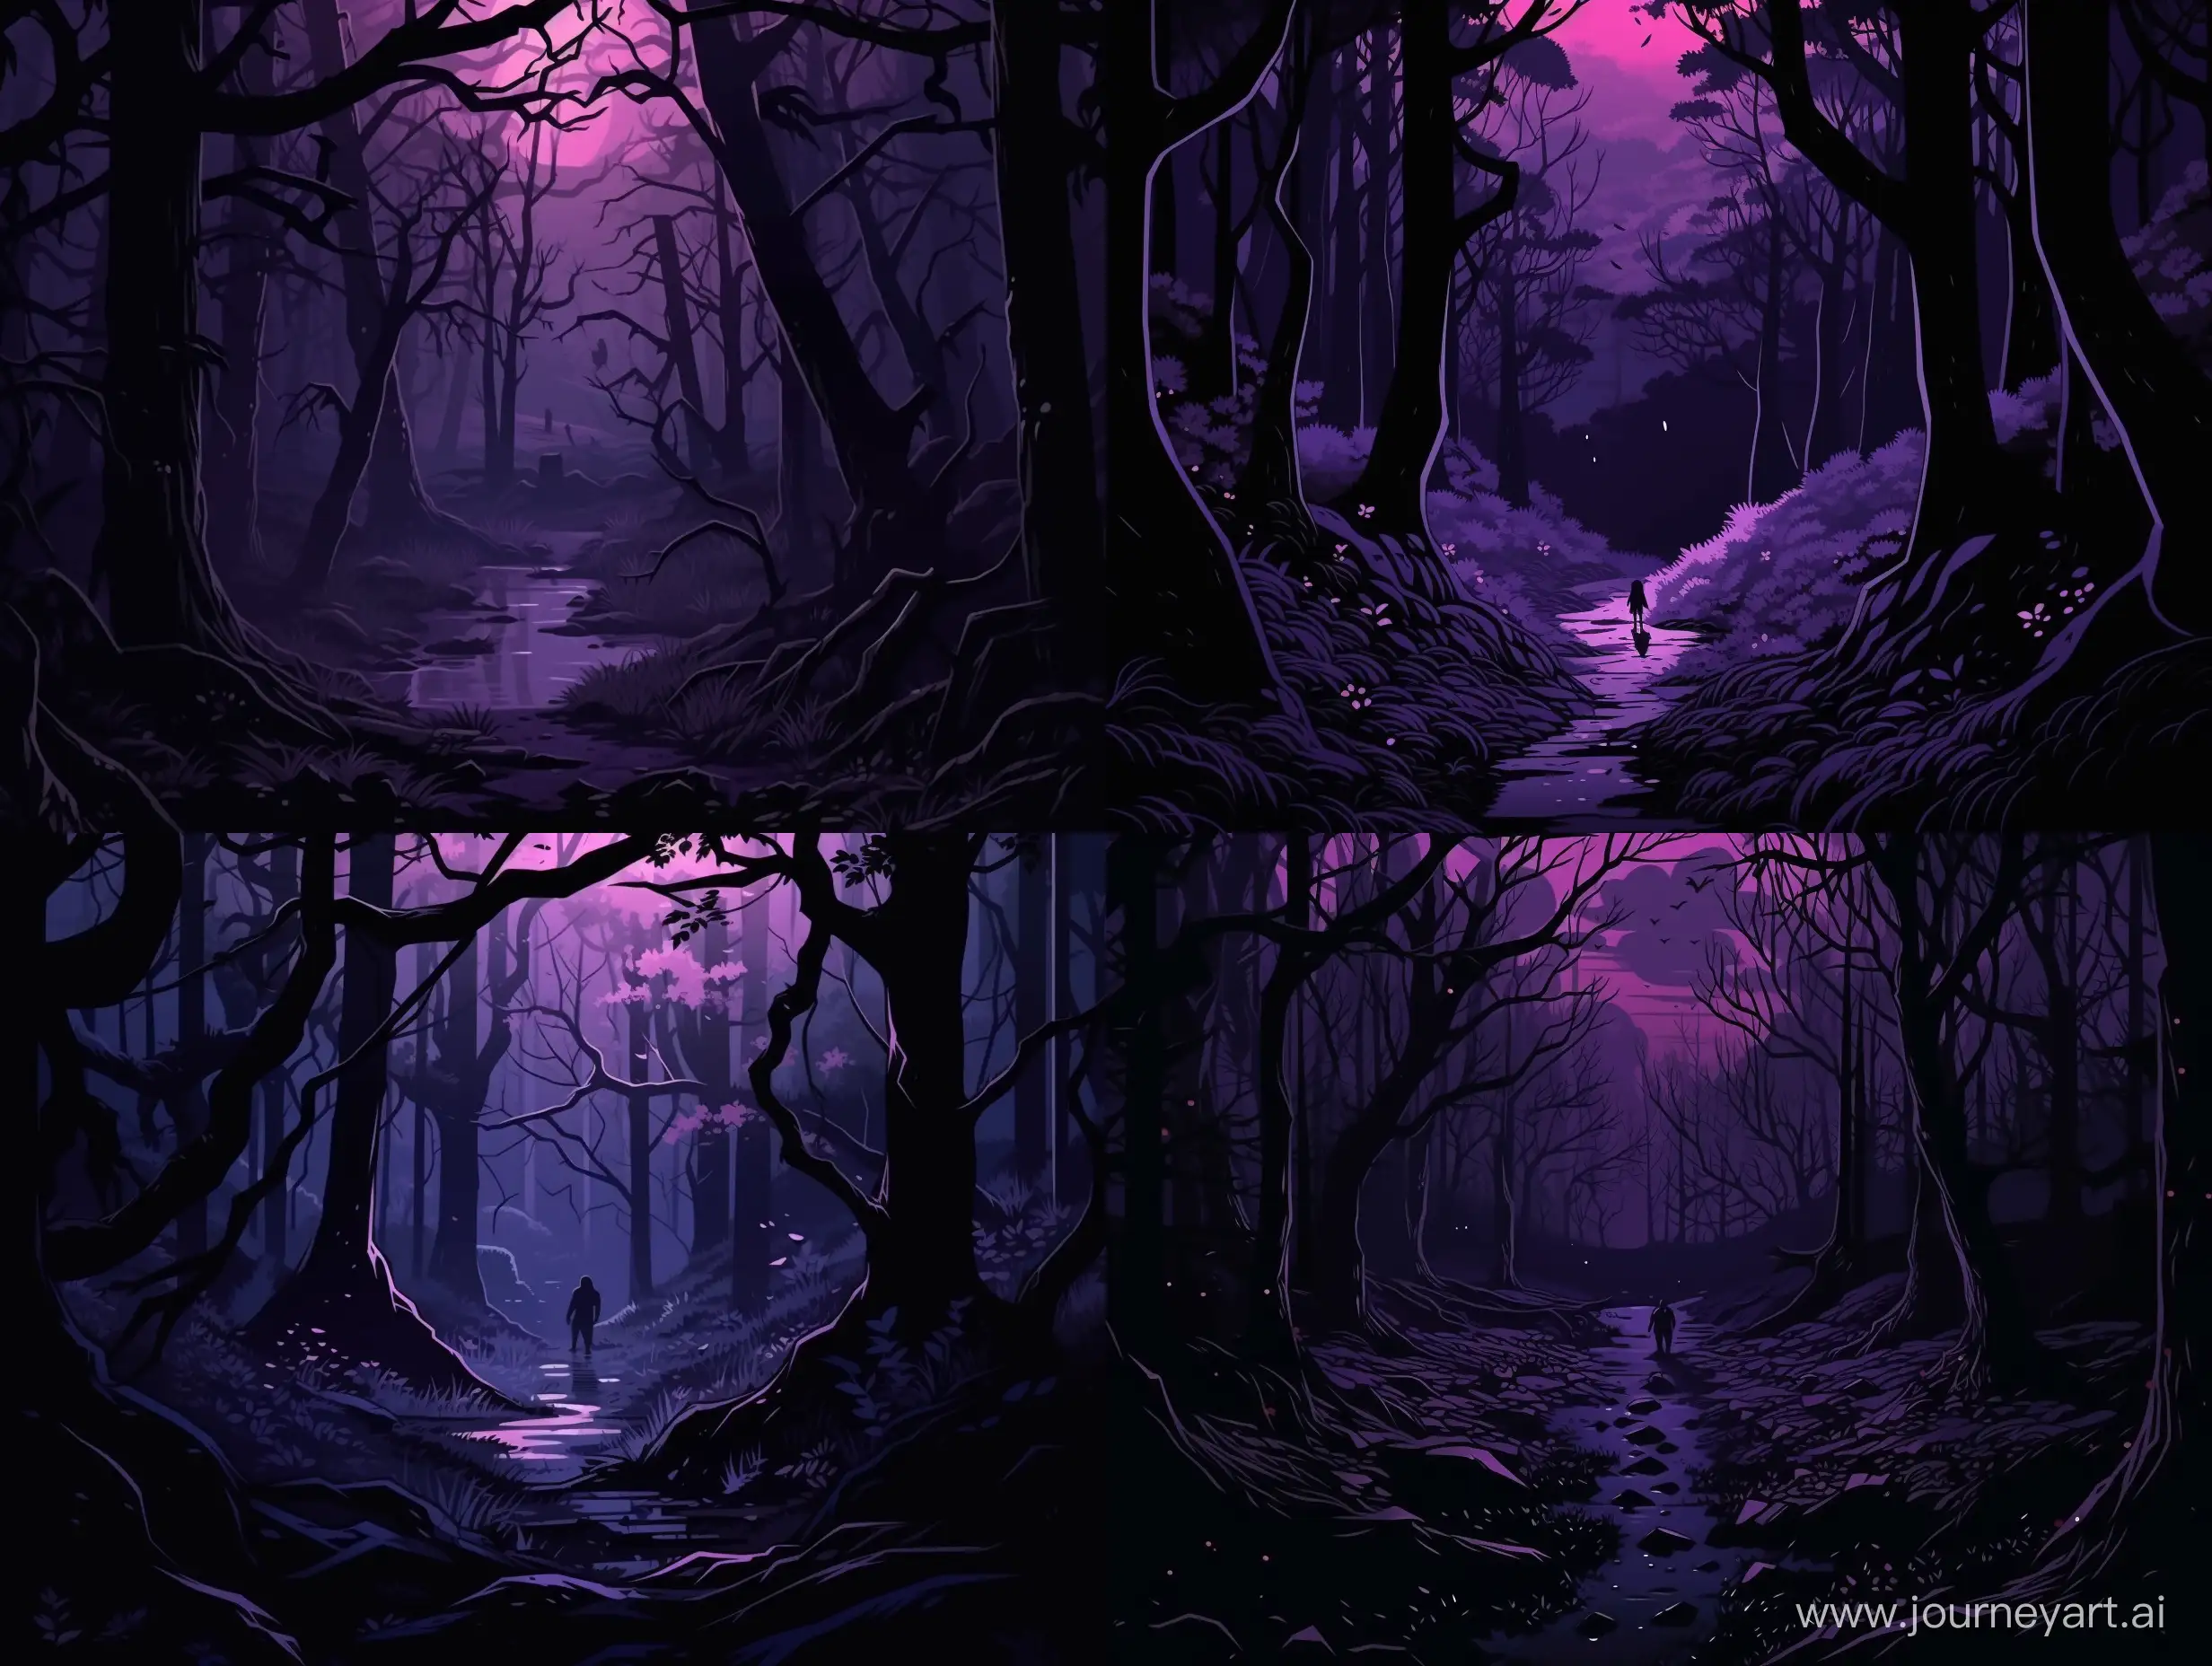 violette and purple colors, black currant leaves, night dark gloomy forrest, gothic style dark shades, dark fantasy atmosphere, comics style, 2d